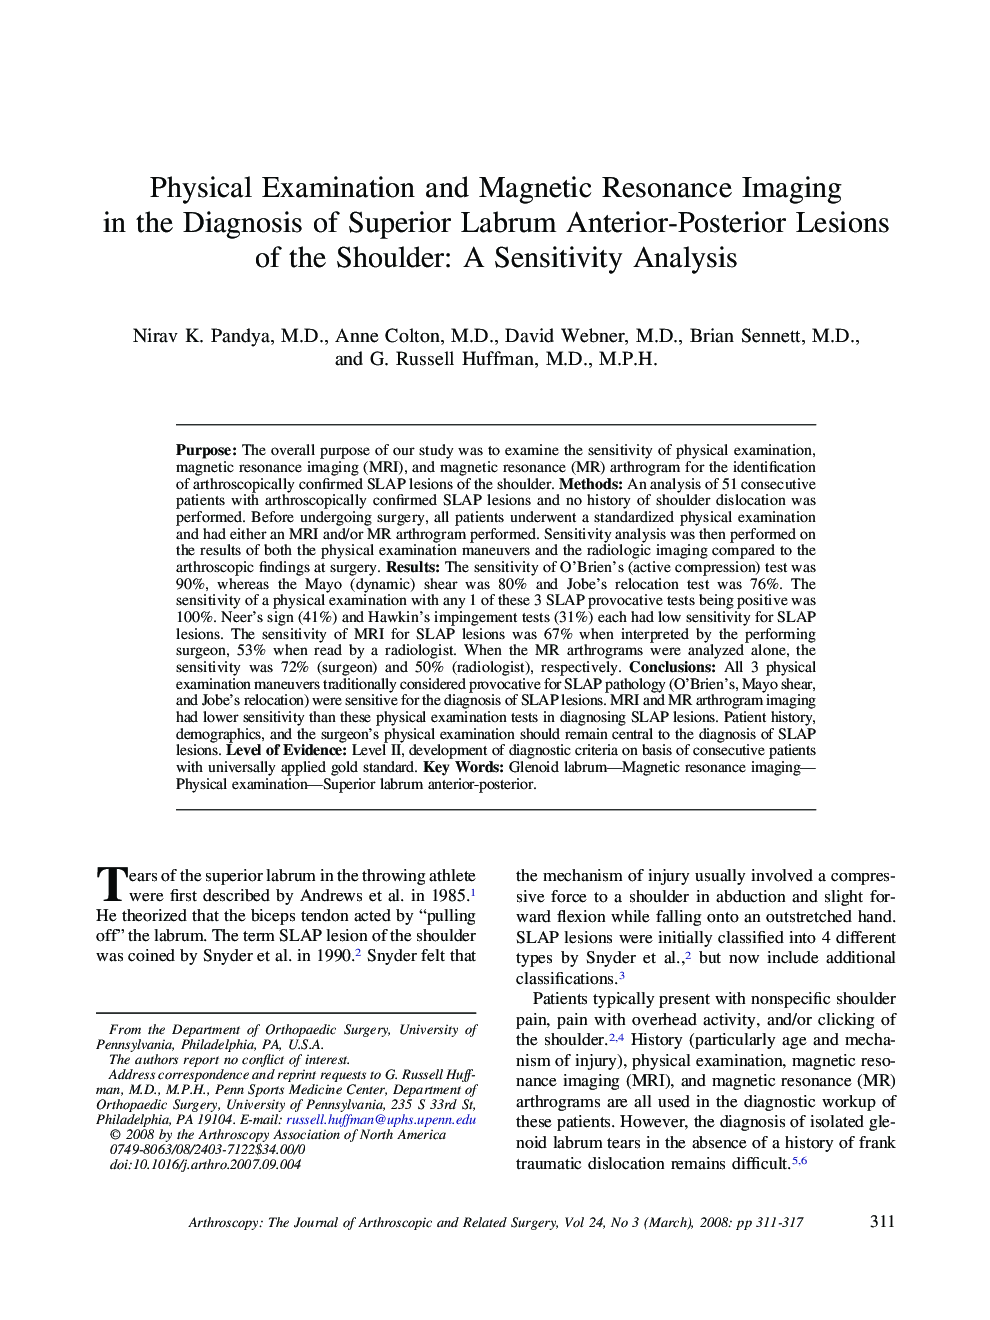 Physical Examination and Magnetic Resonance Imaging in the Diagnosis of Superior Labrum Anterior-Posterior Lesions of the Shoulder: A Sensitivity Analysis 